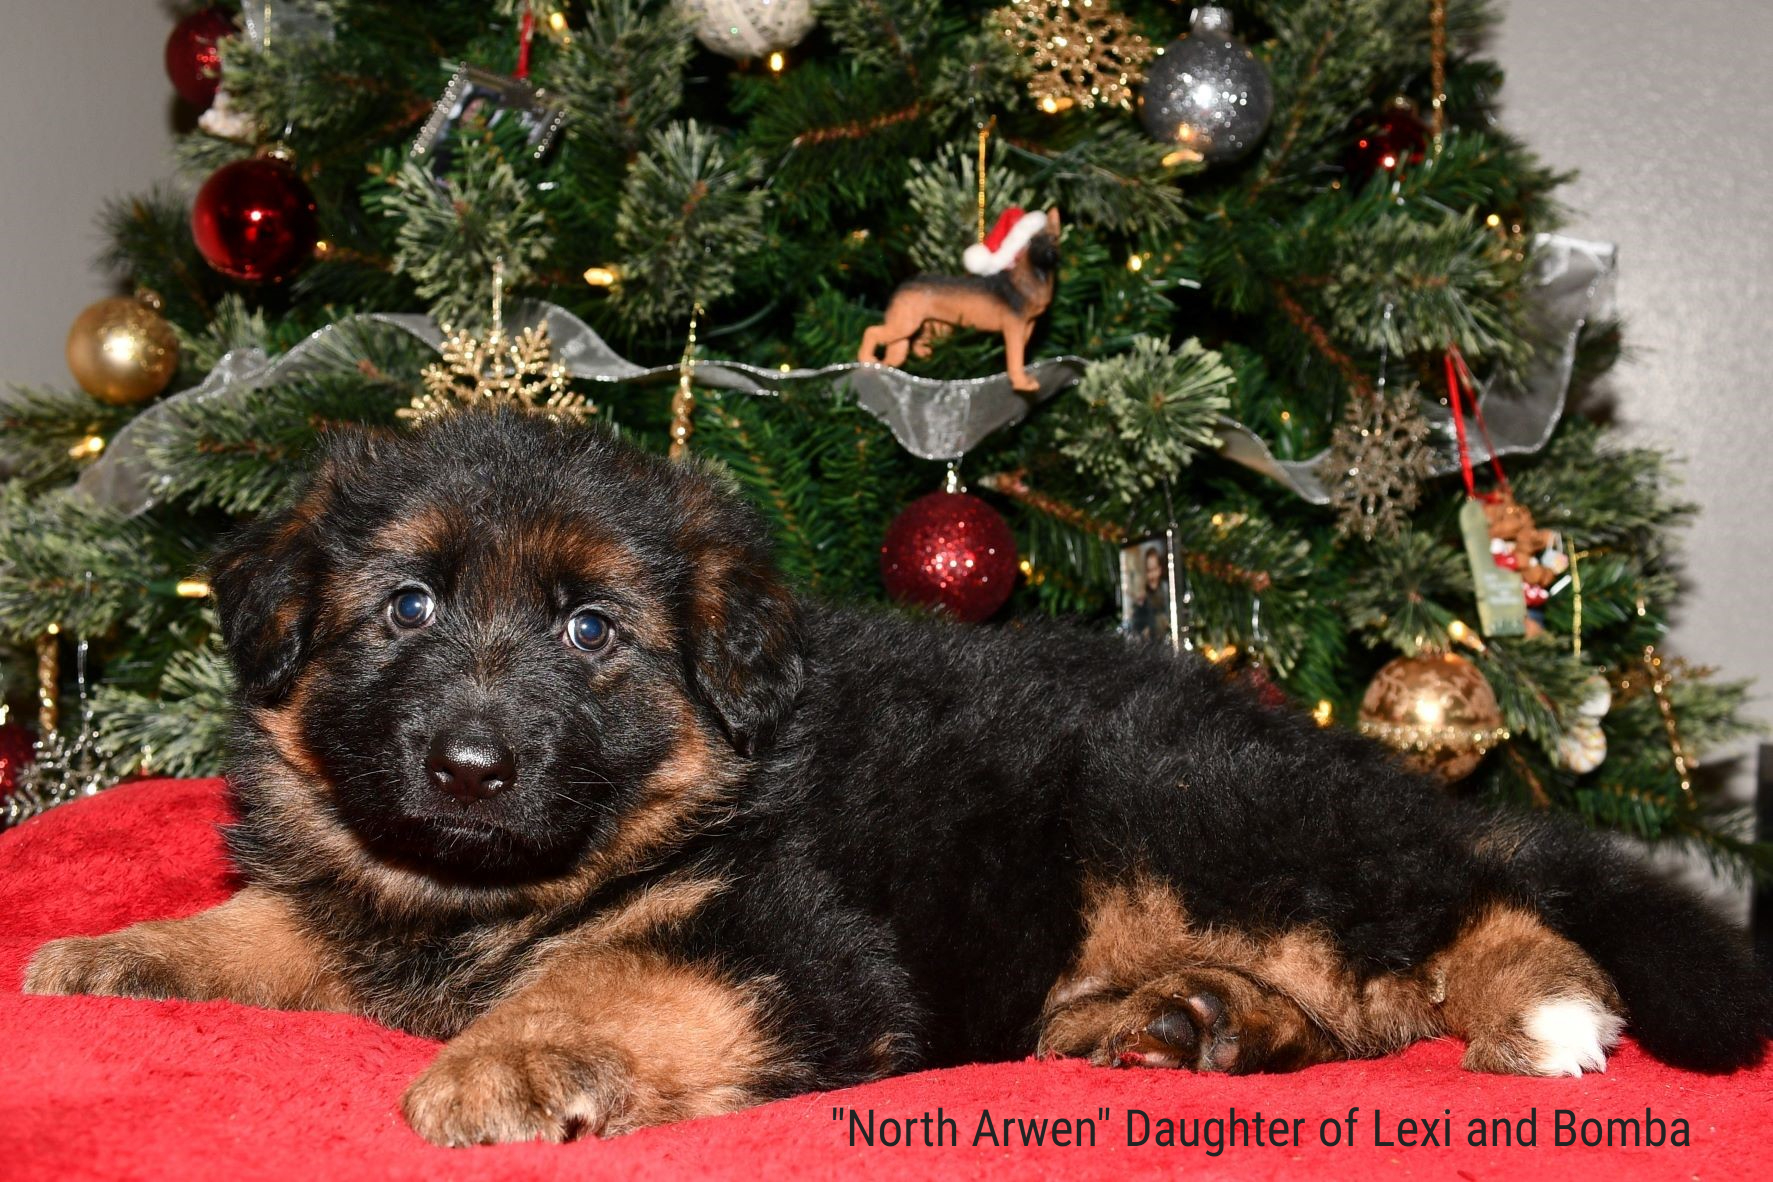 North Arwen Daughter of Lexi and Bomba